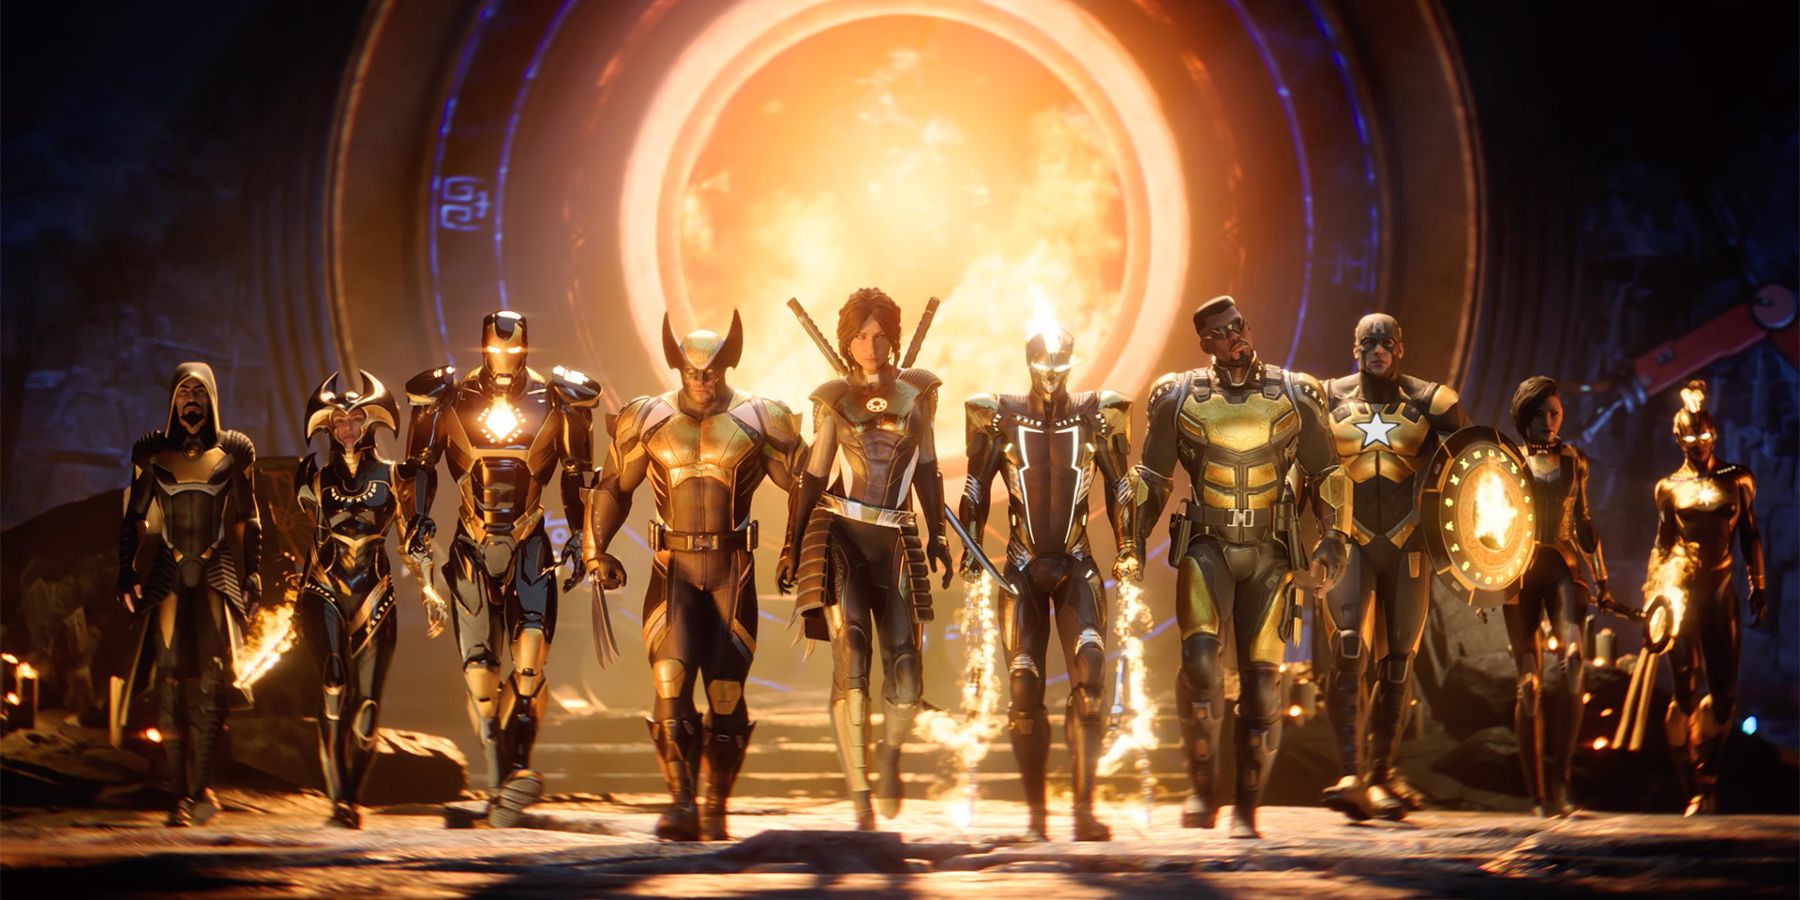 Marvel's Midnight Suns is expected in 2022